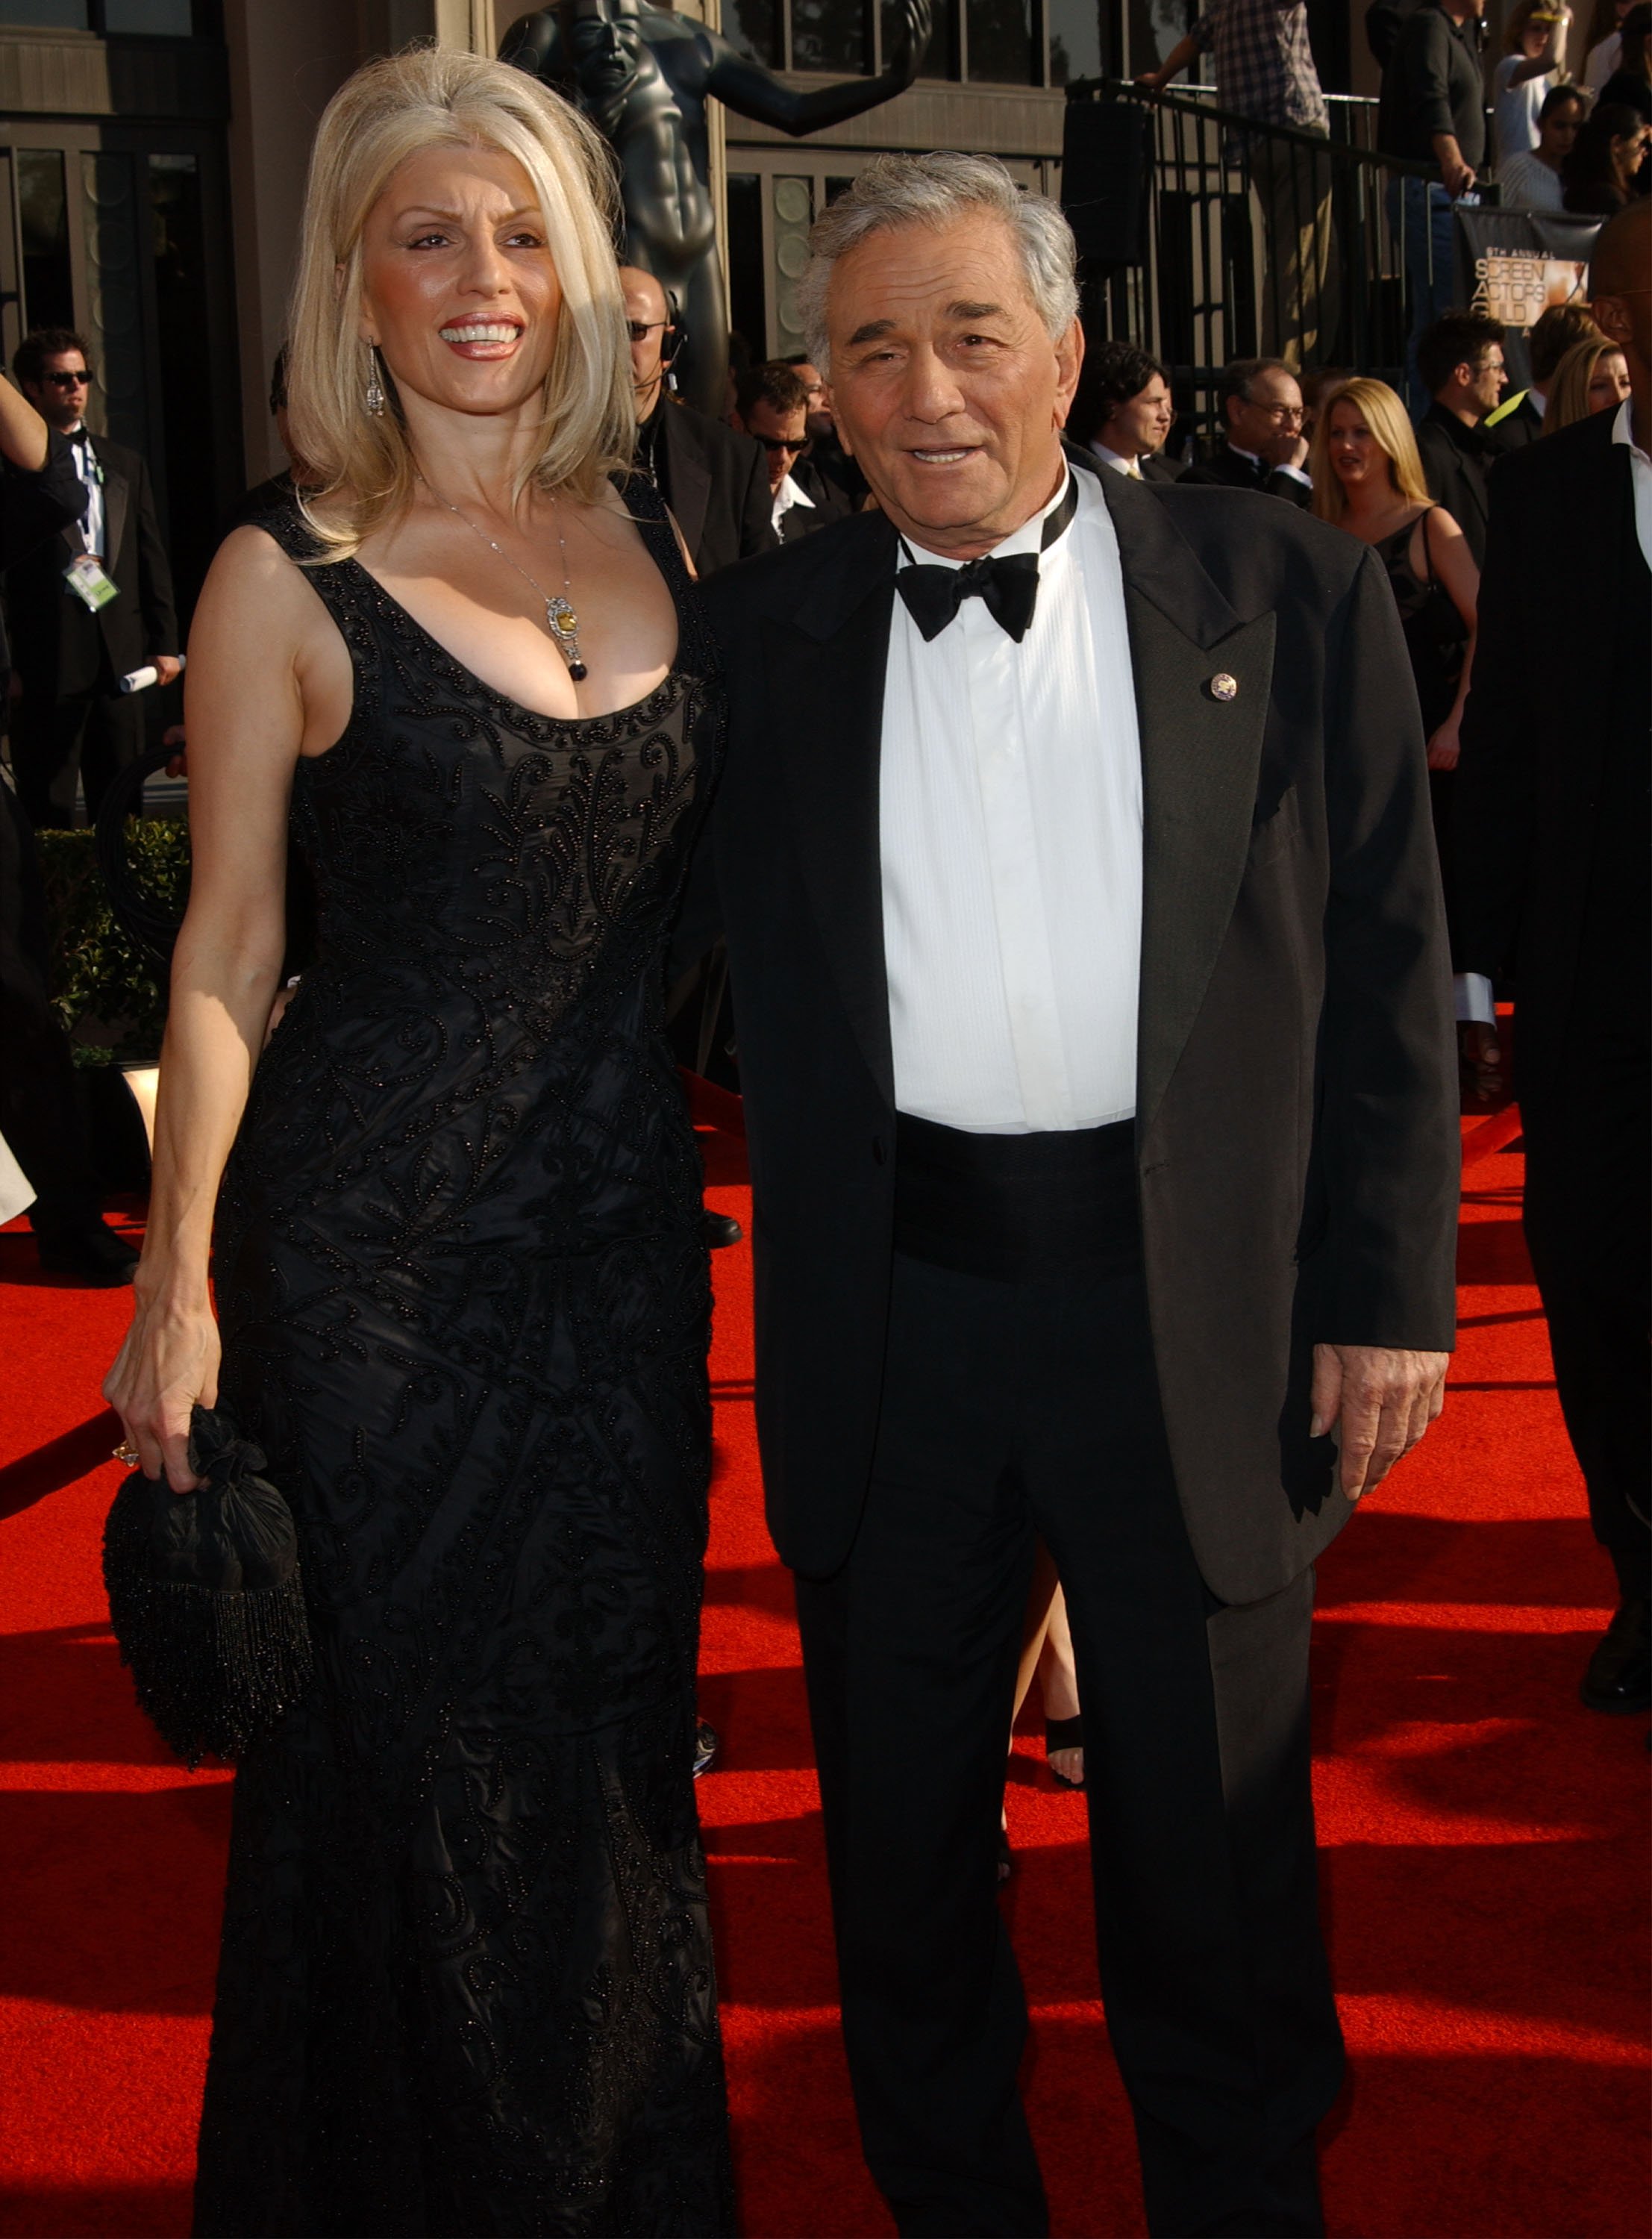 Peter Falk and Shera Danese at the 9th Annual Screen Actors Guild Awards on March 9, 2003 | Photo: GettyImages